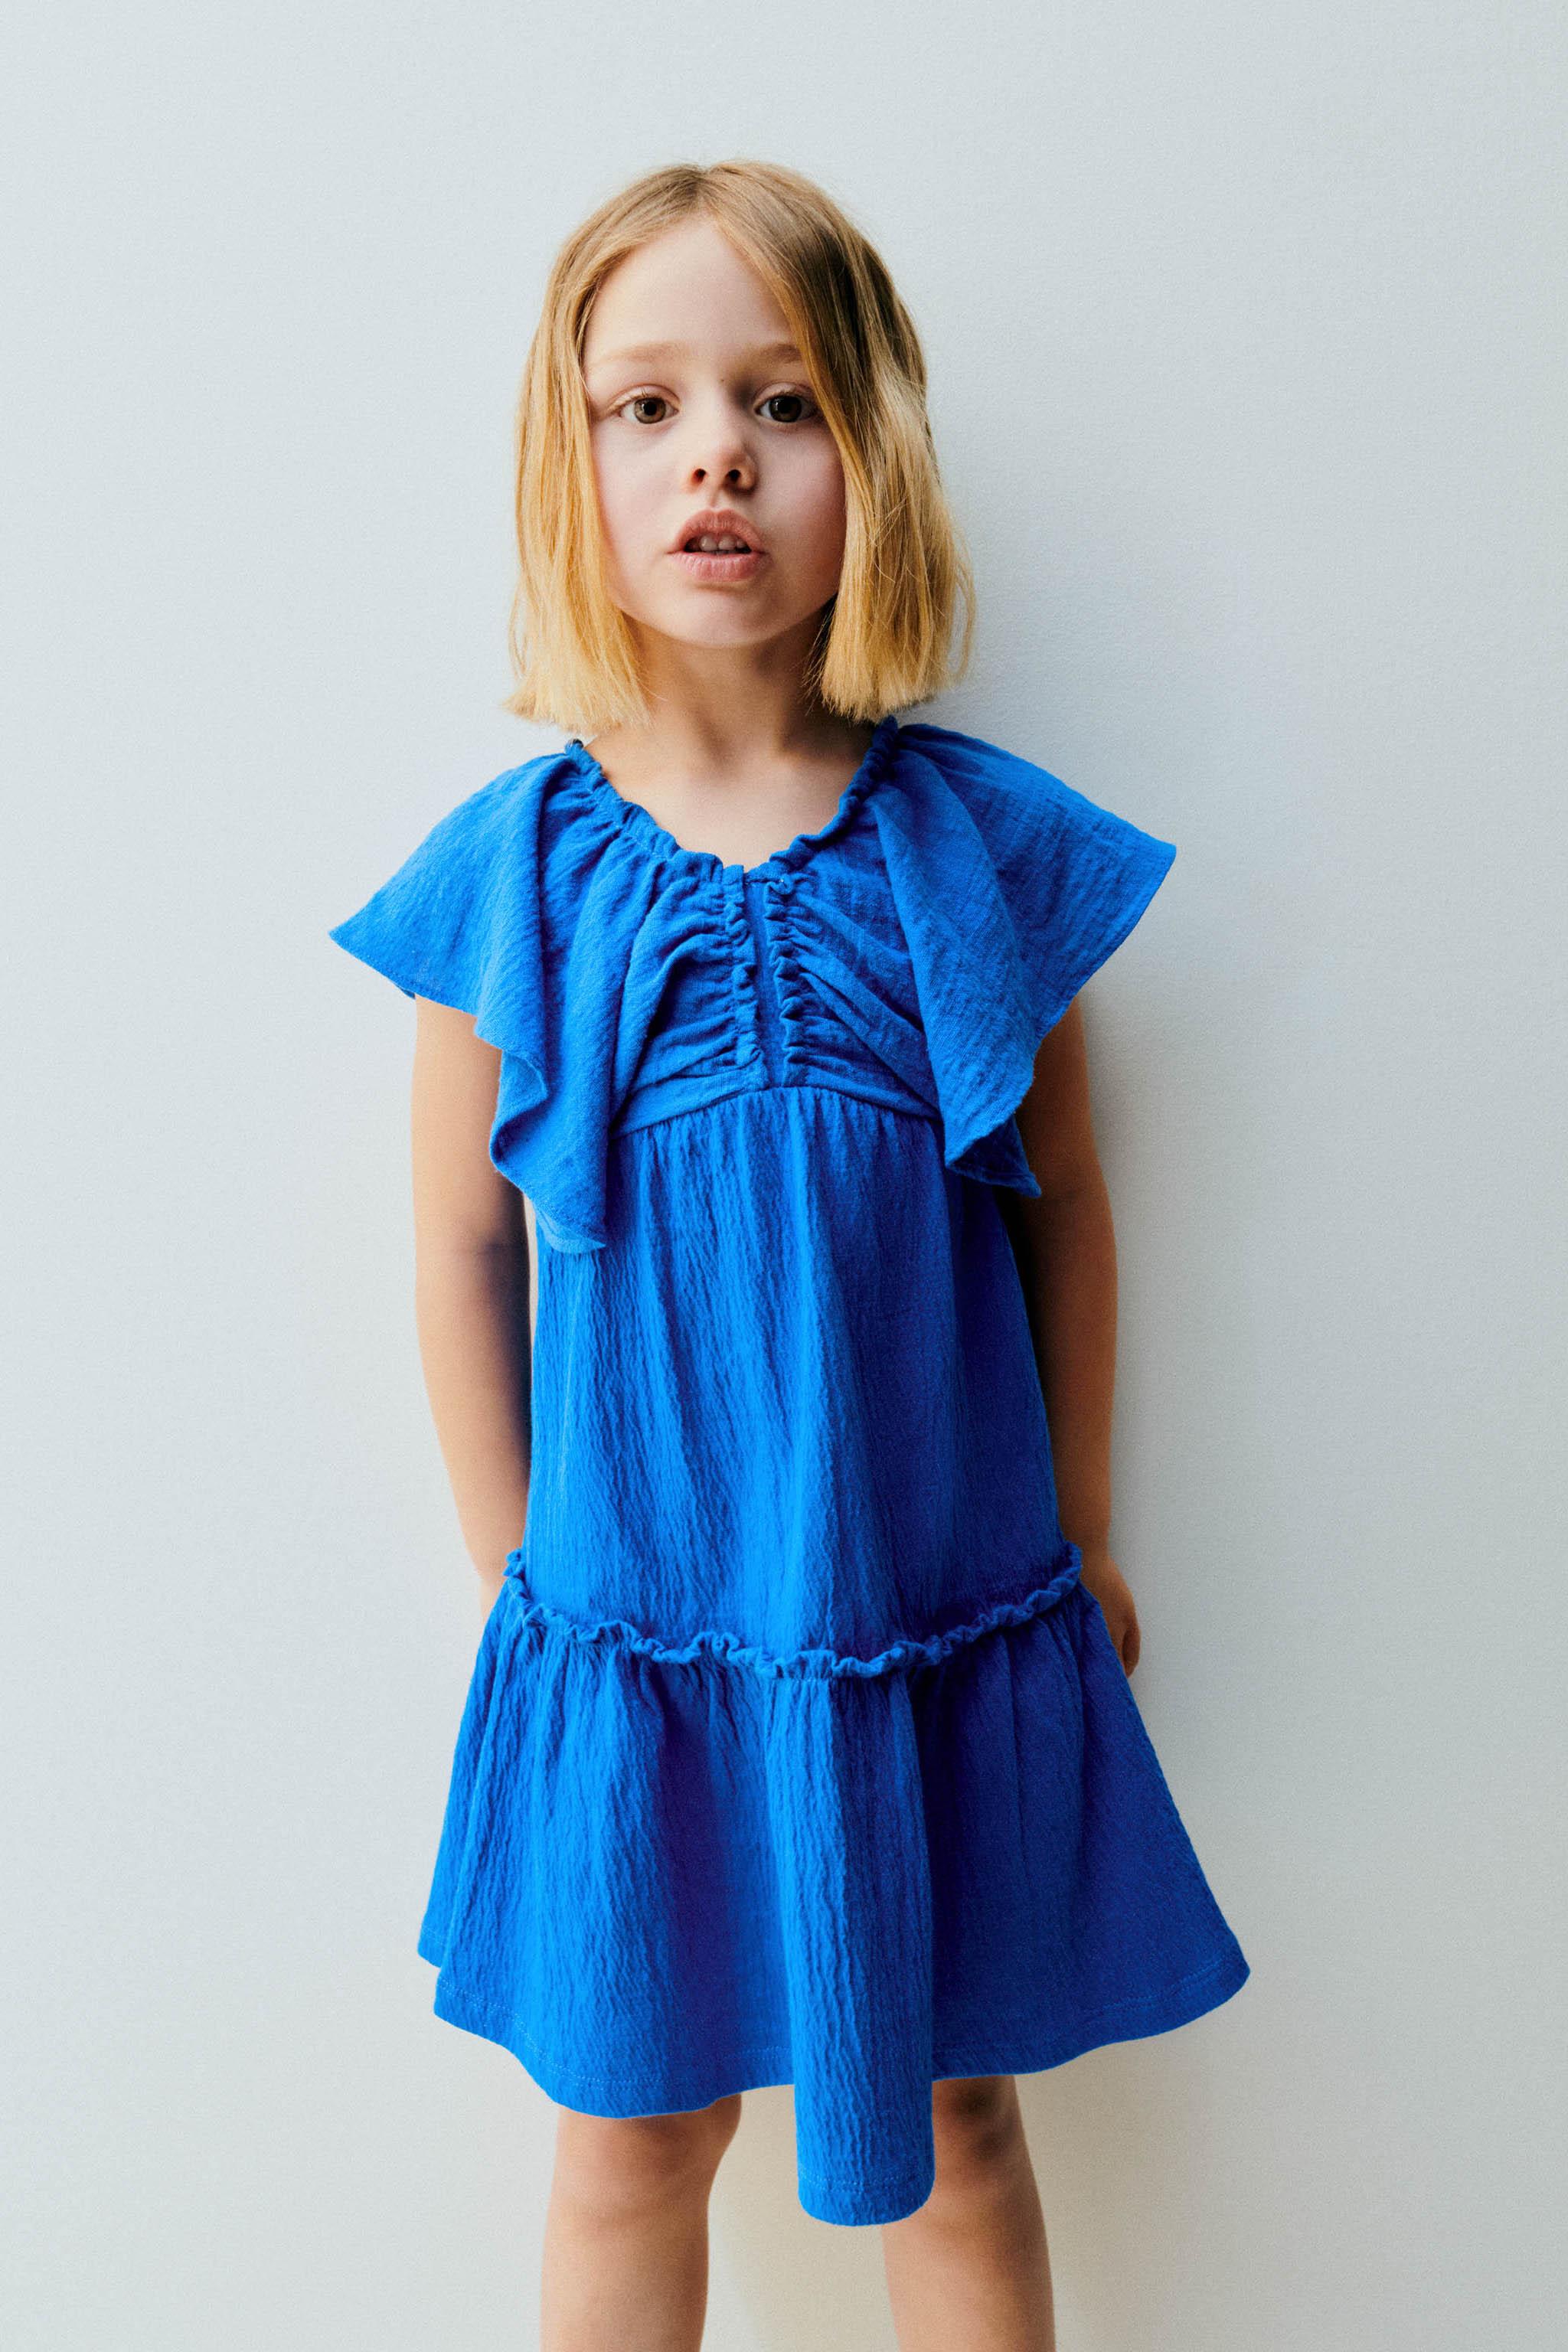 Baby Girls' Dresses | Explore our New Arrivals | ZARA United States